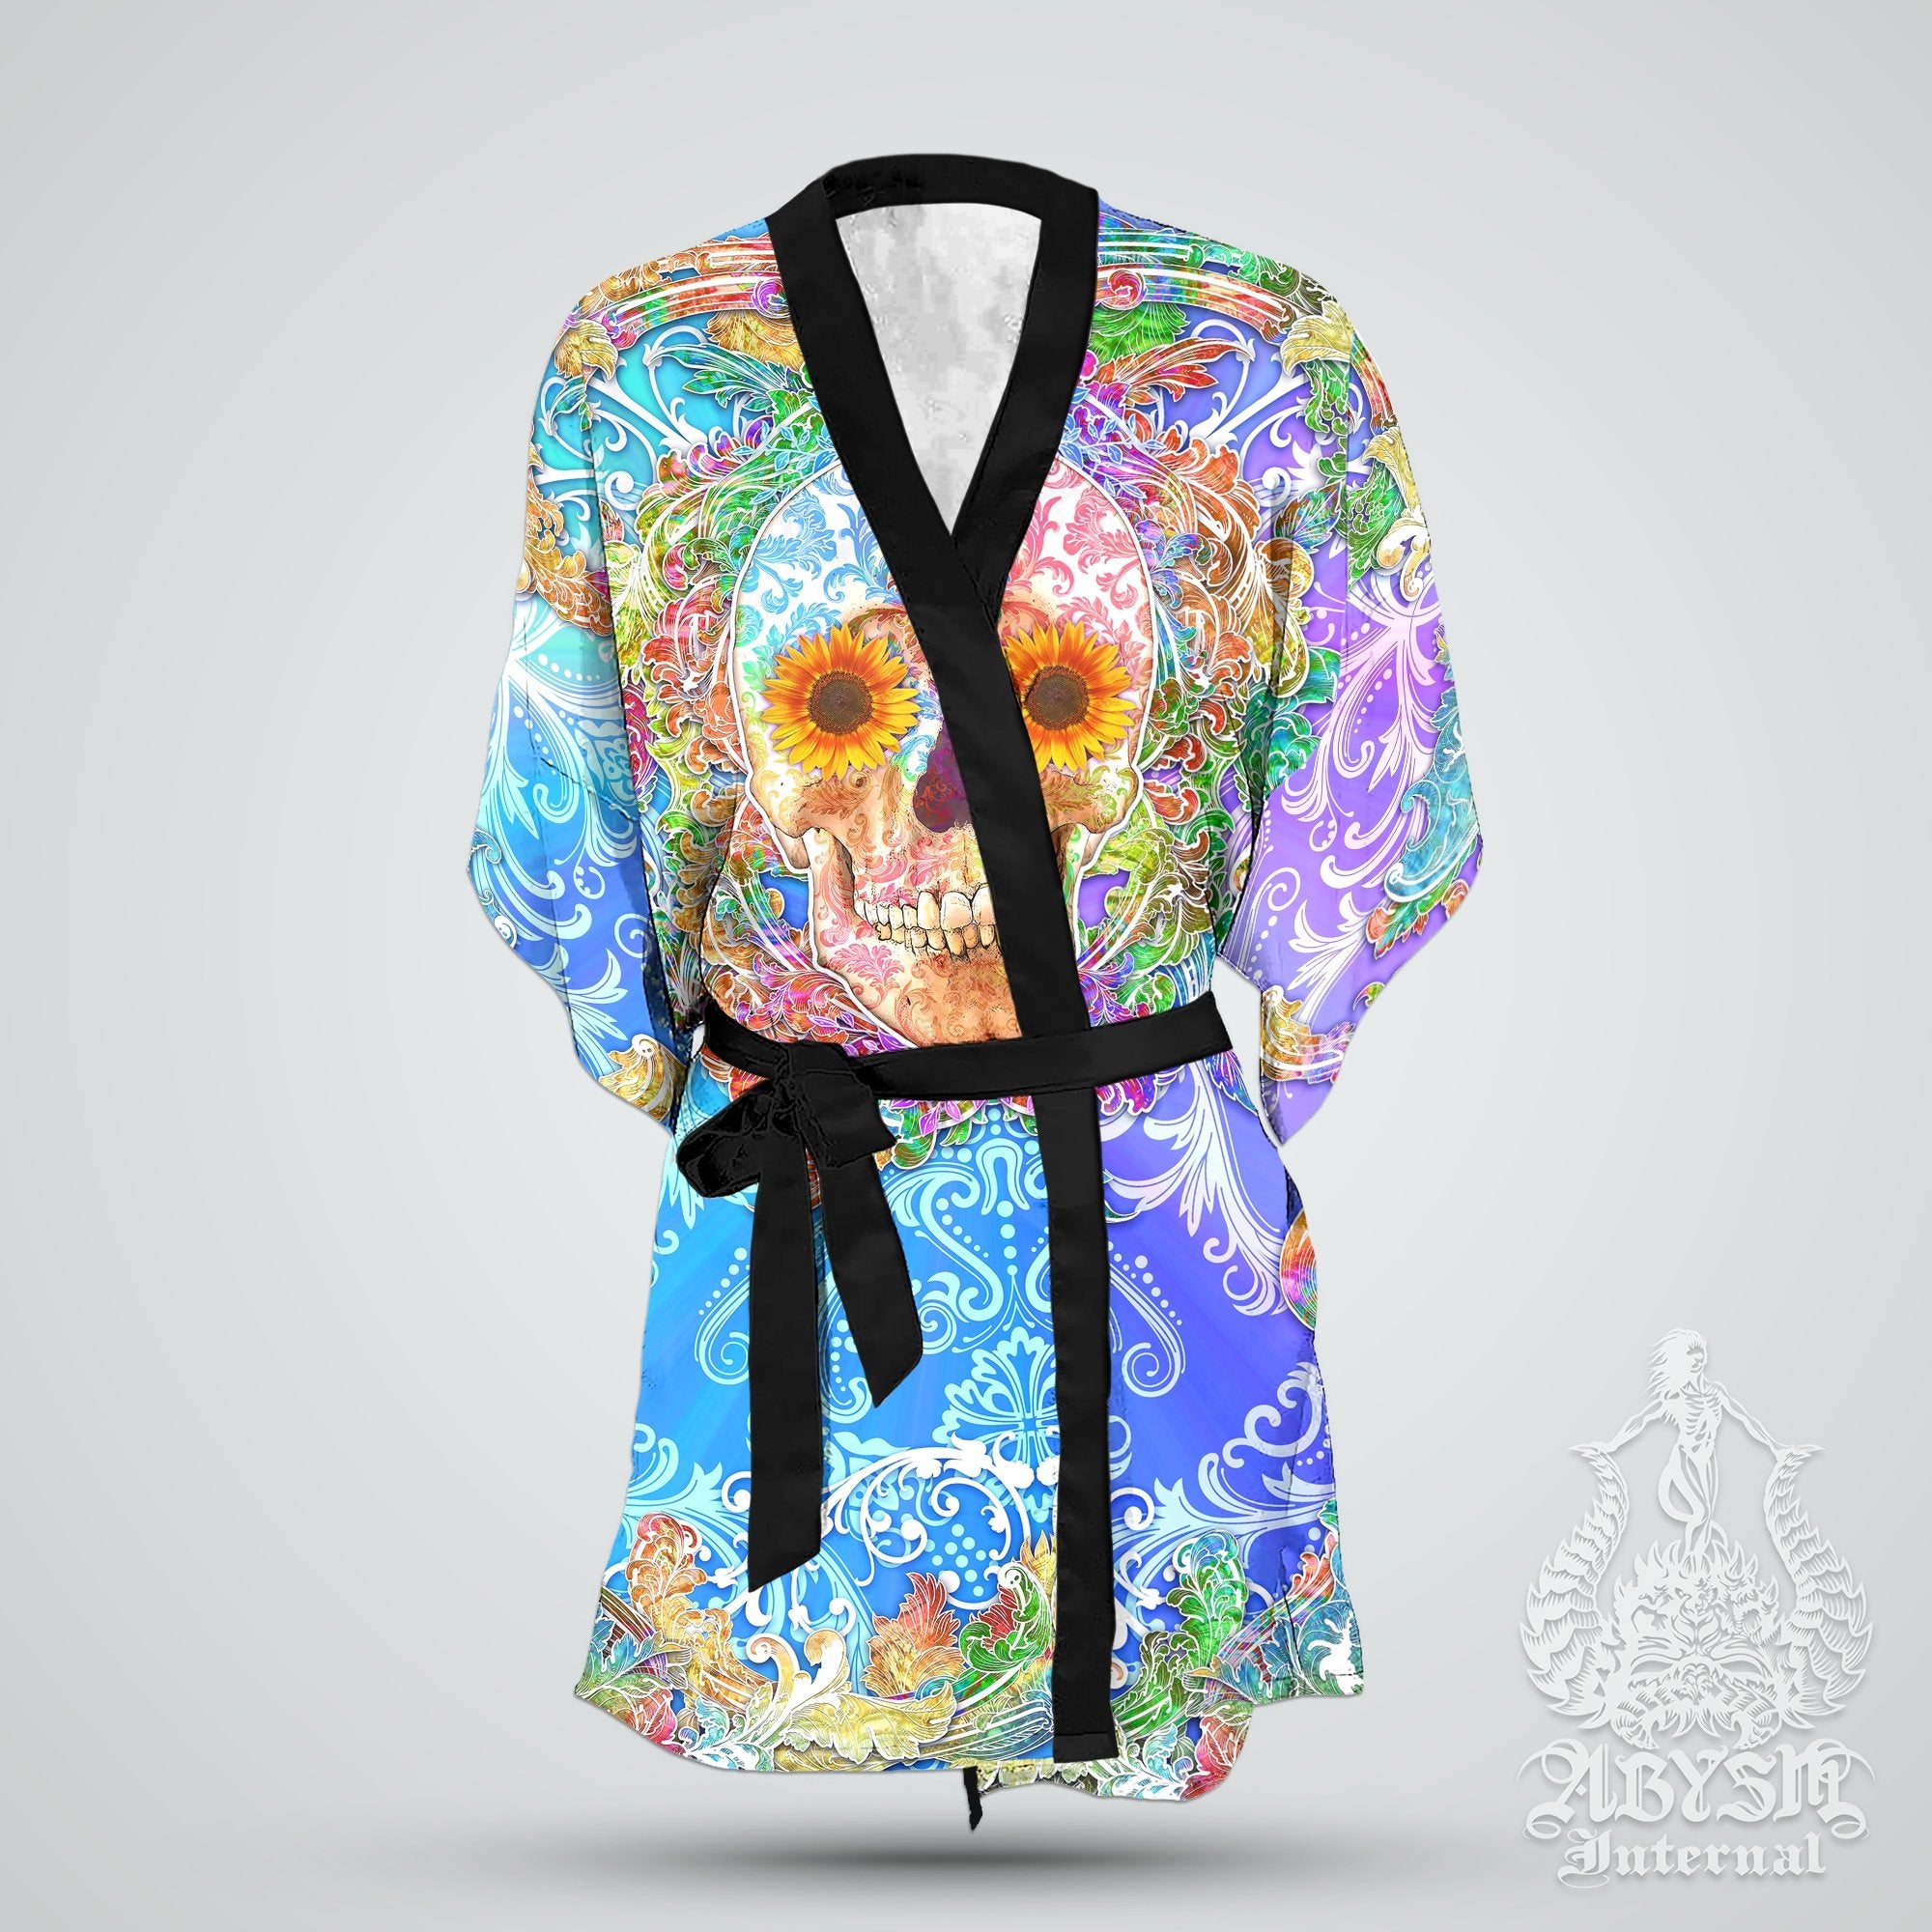 Skull Cover Up, Beach Outfit, Party Kimono, Boho Summer Festival Robe, Indie and Alternative Clothing, Unisex - Psy Color - Abysm Internal